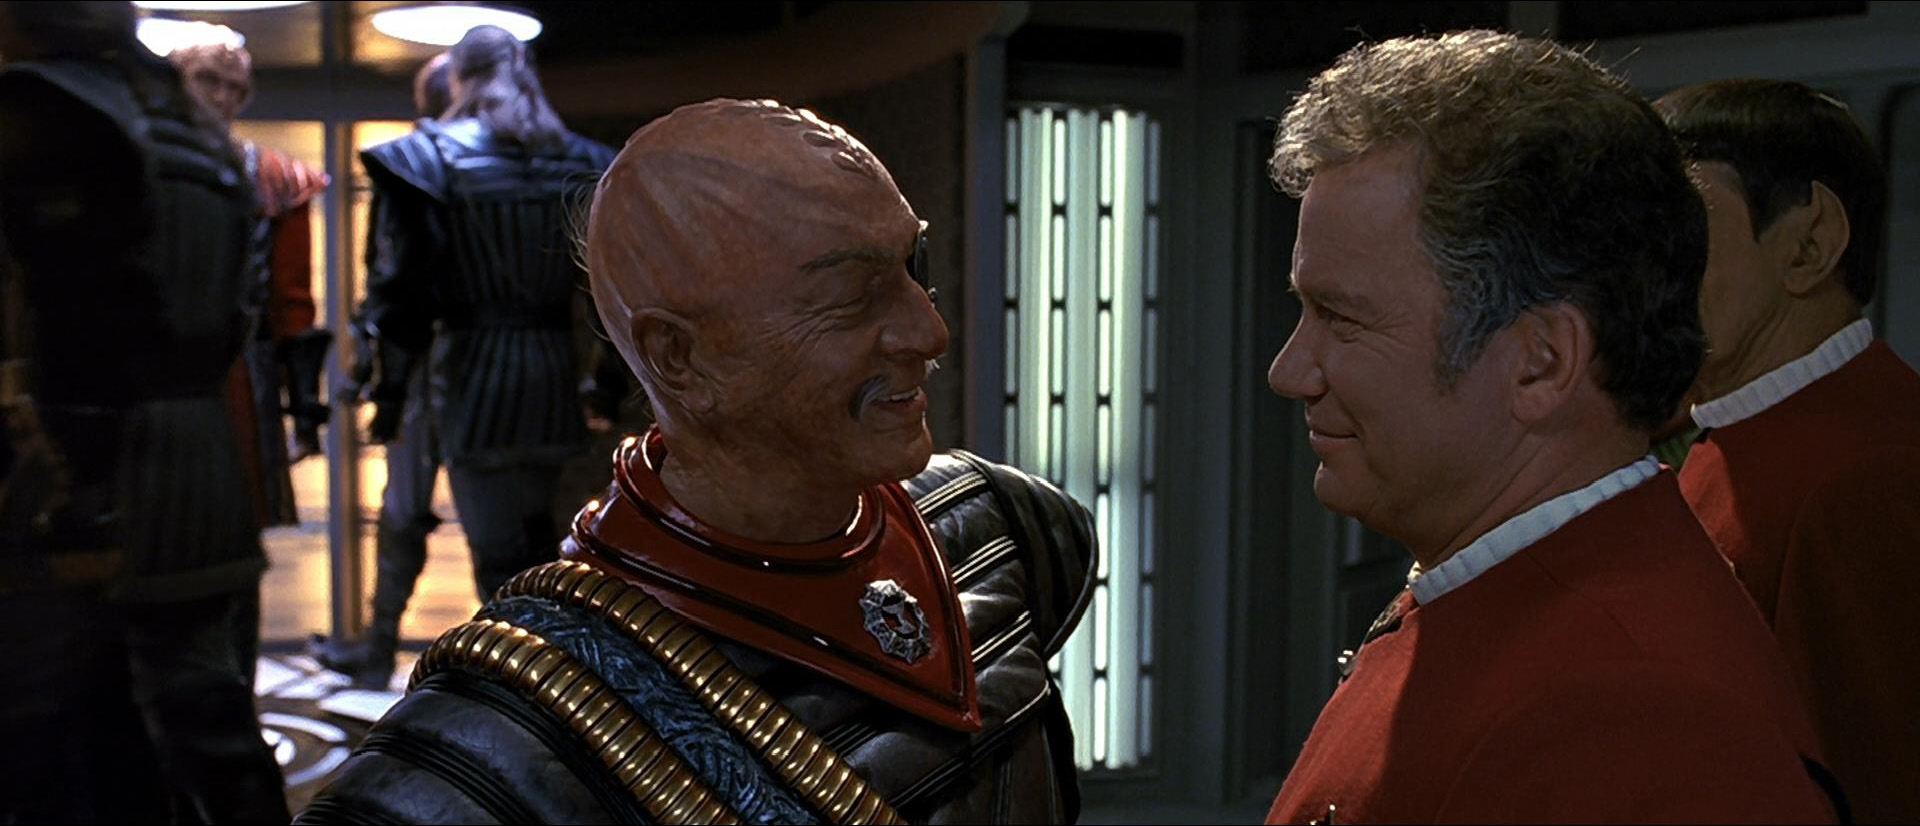 General Chang und Captain Kirk in "The Undiscovered Country" (Bild: ViacomCBS)